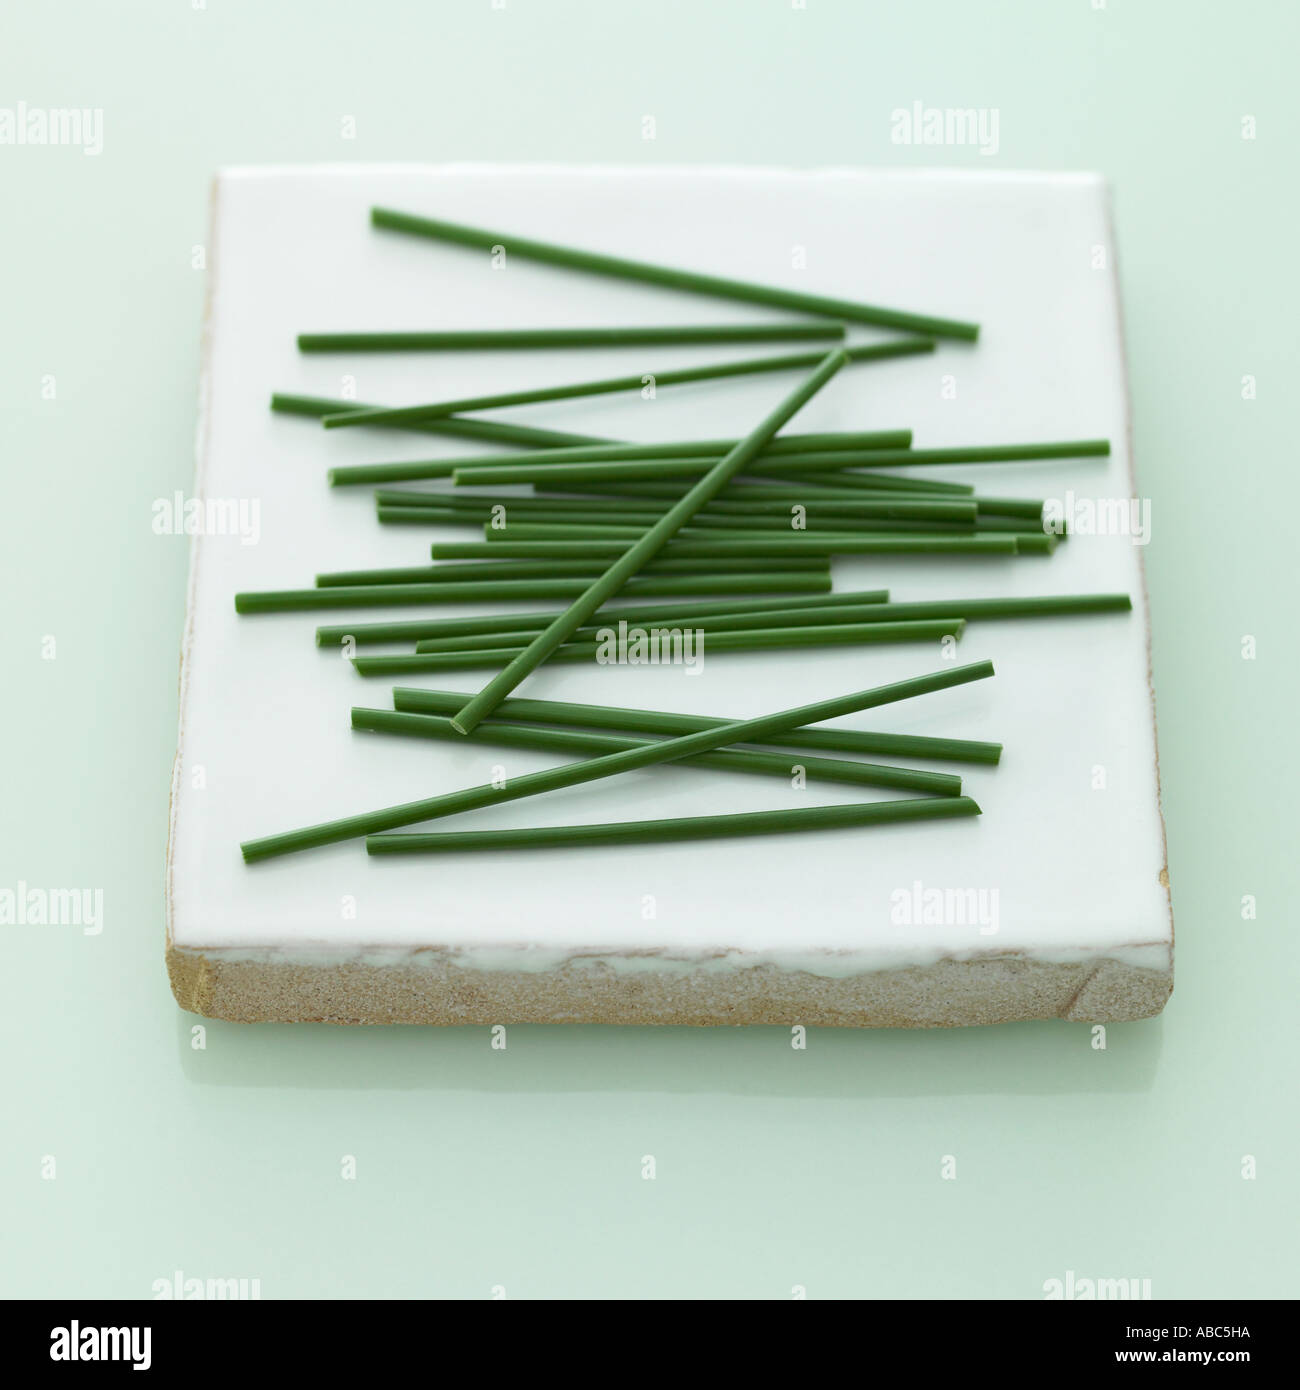 Chives - one of a series of similar herb images Stock Photo